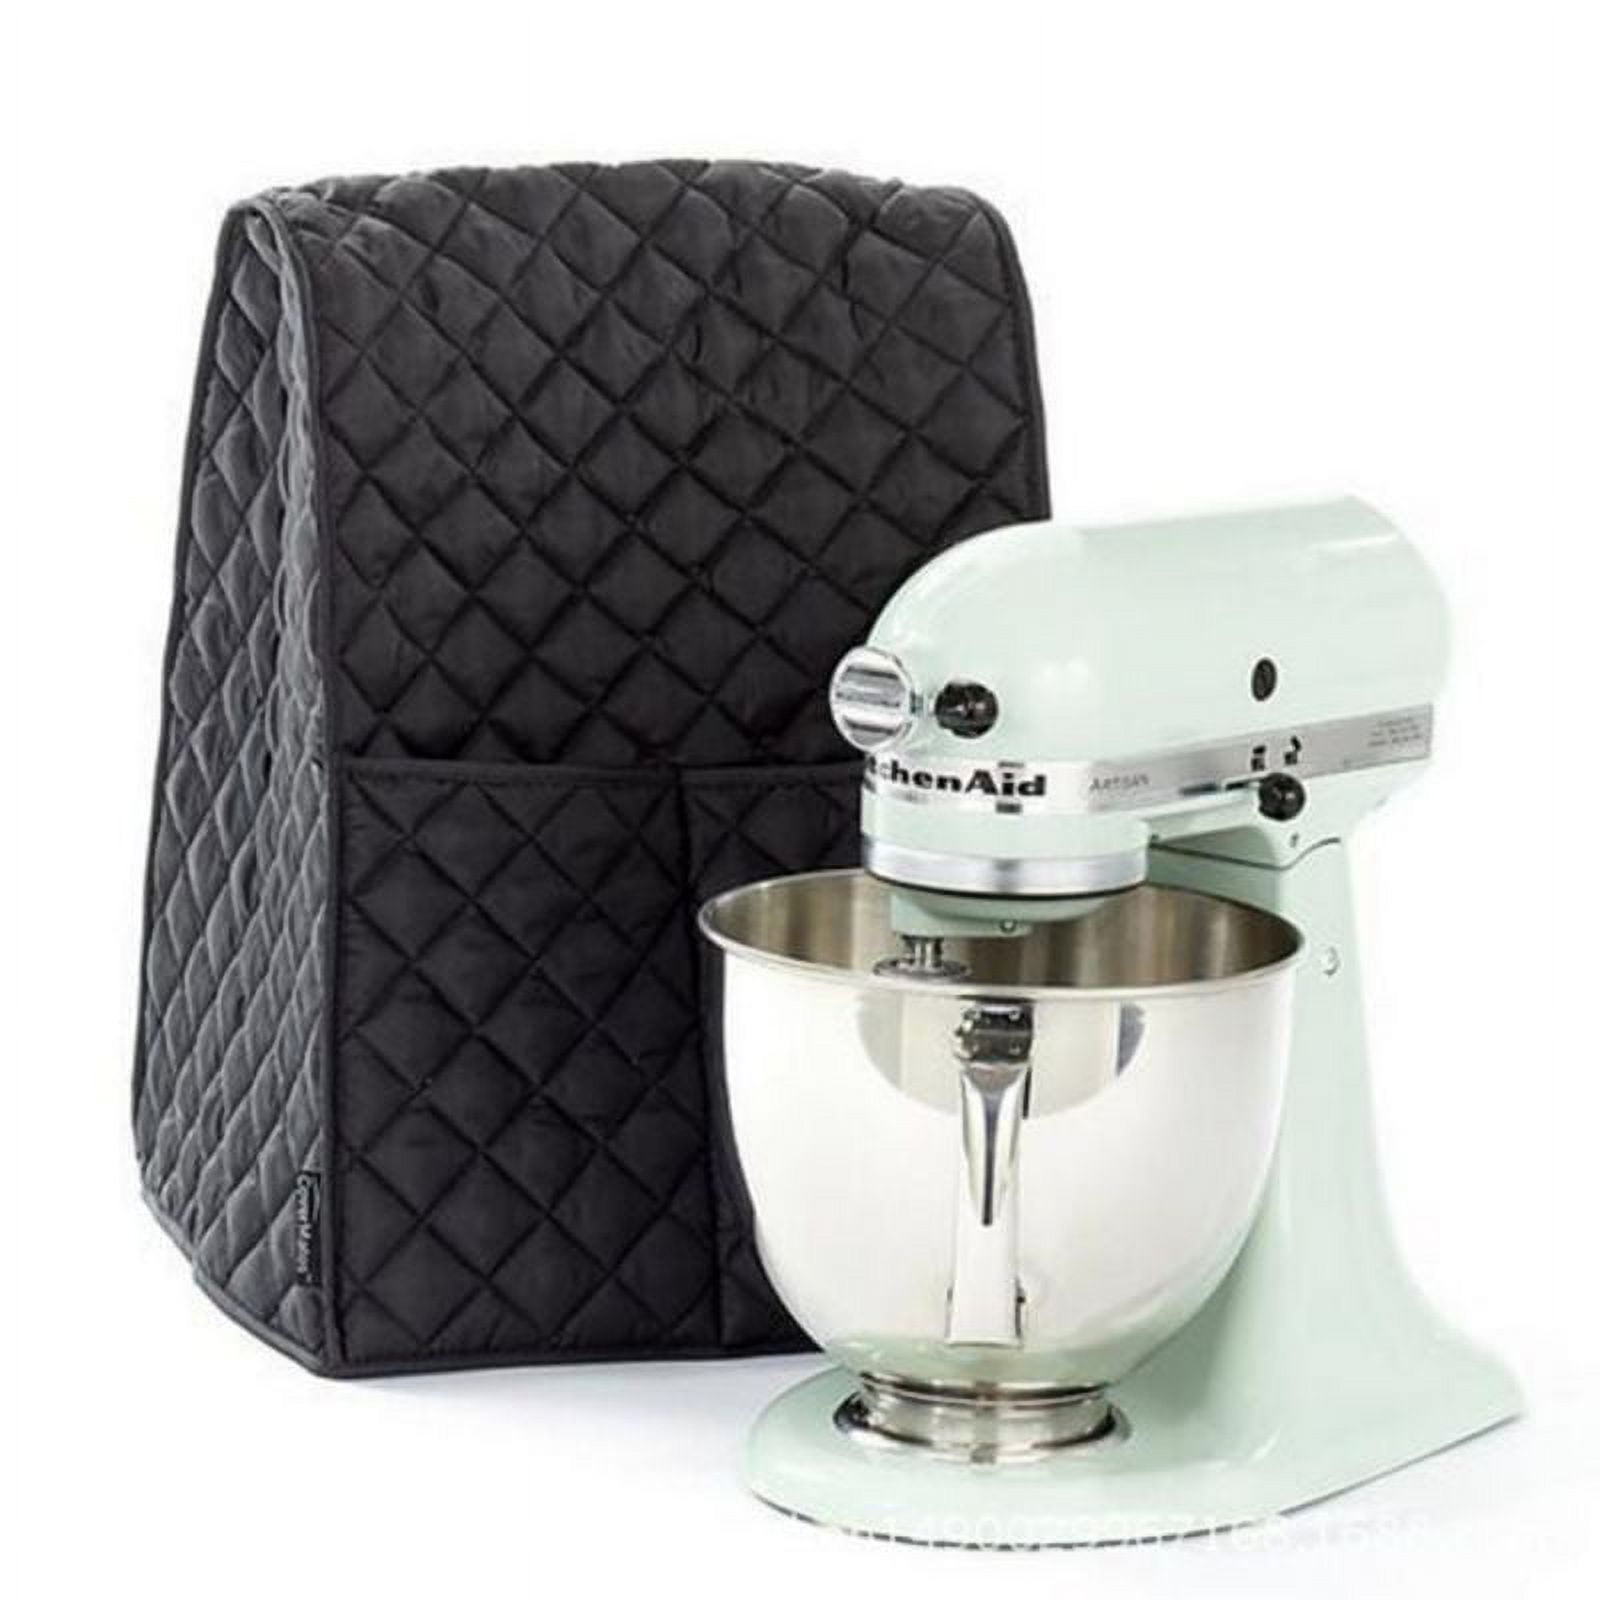 Stand Mixer Dust-proof Cover with Organizer Bag for KitchenAid Mixer to Keep Clean and Safe, Size: 30, Black